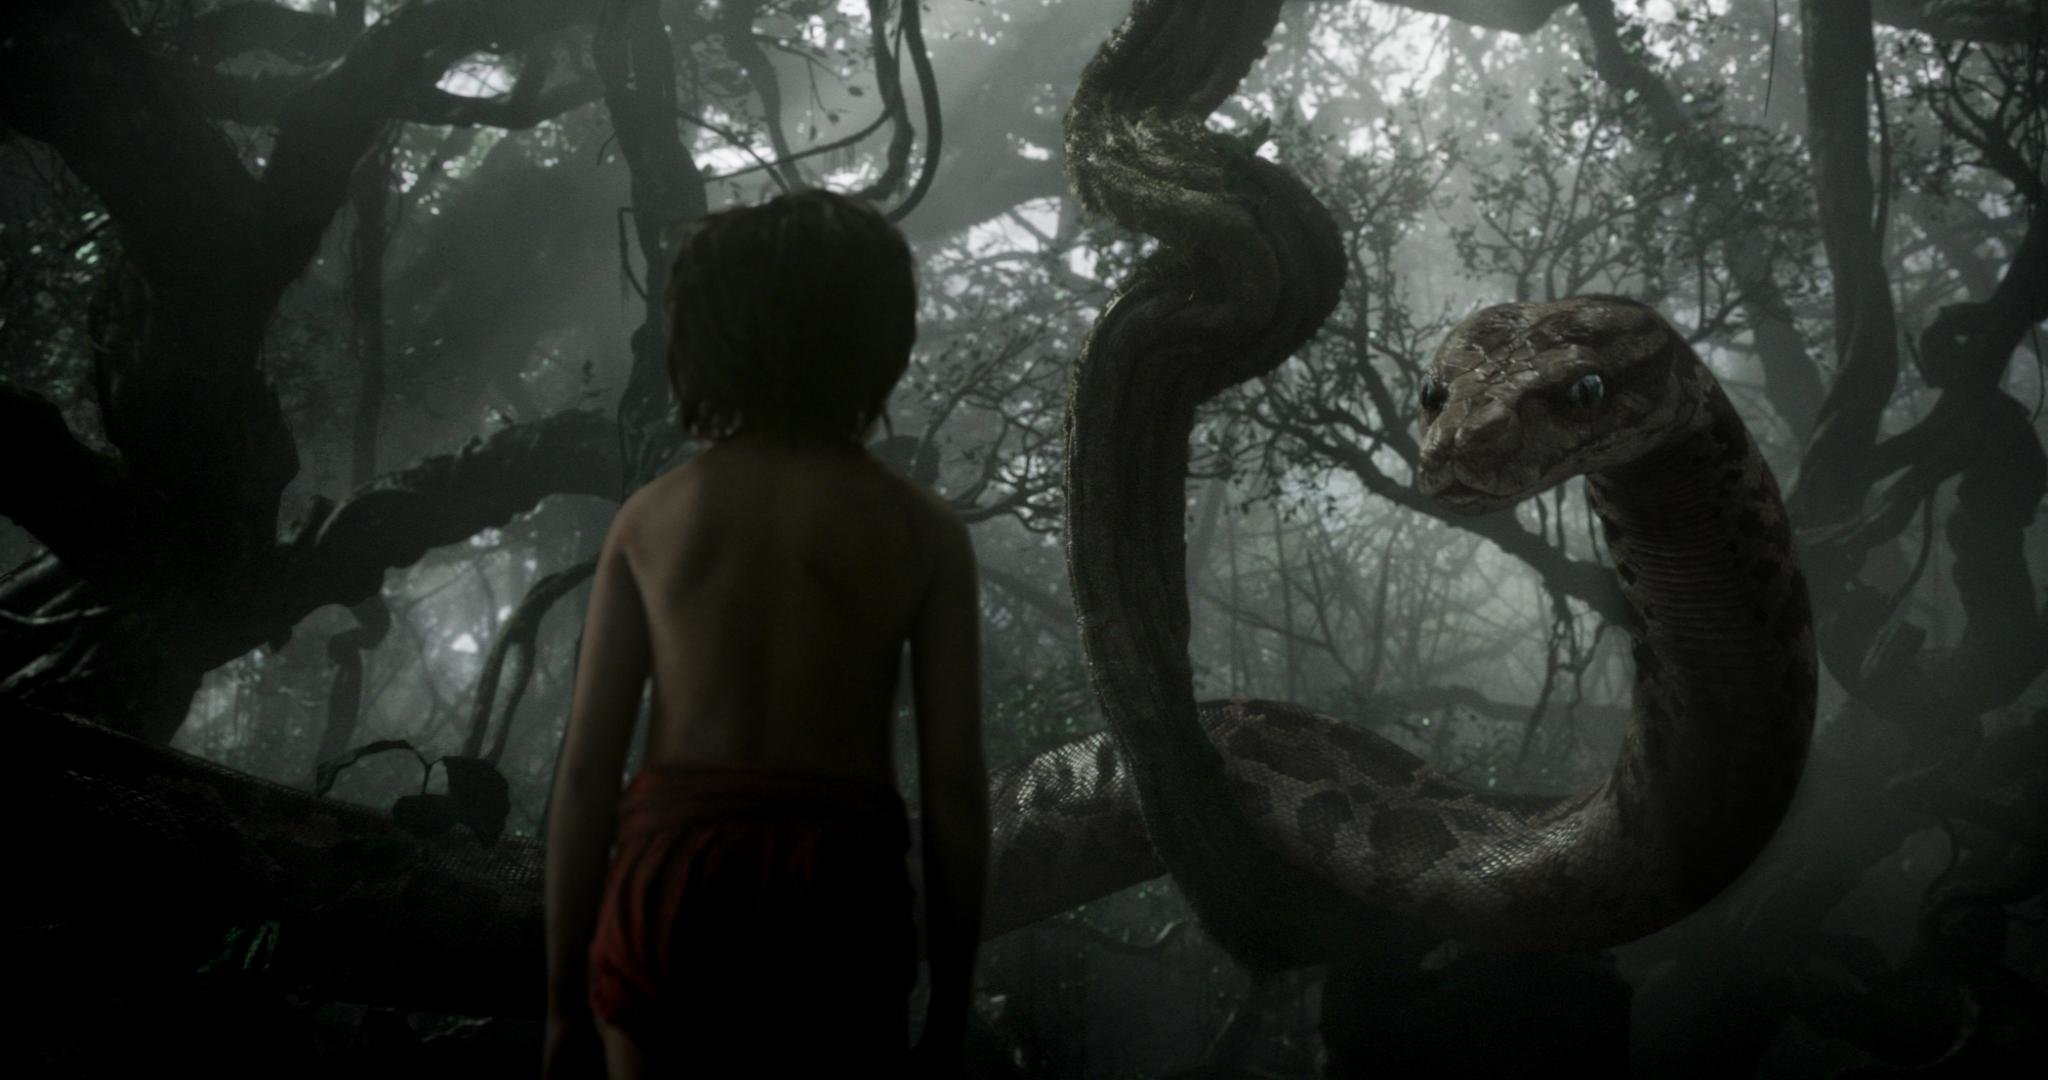 Best The Jungle Book Movie (2016) background ID:86447 for High Resolution hd 2048x1080 computer